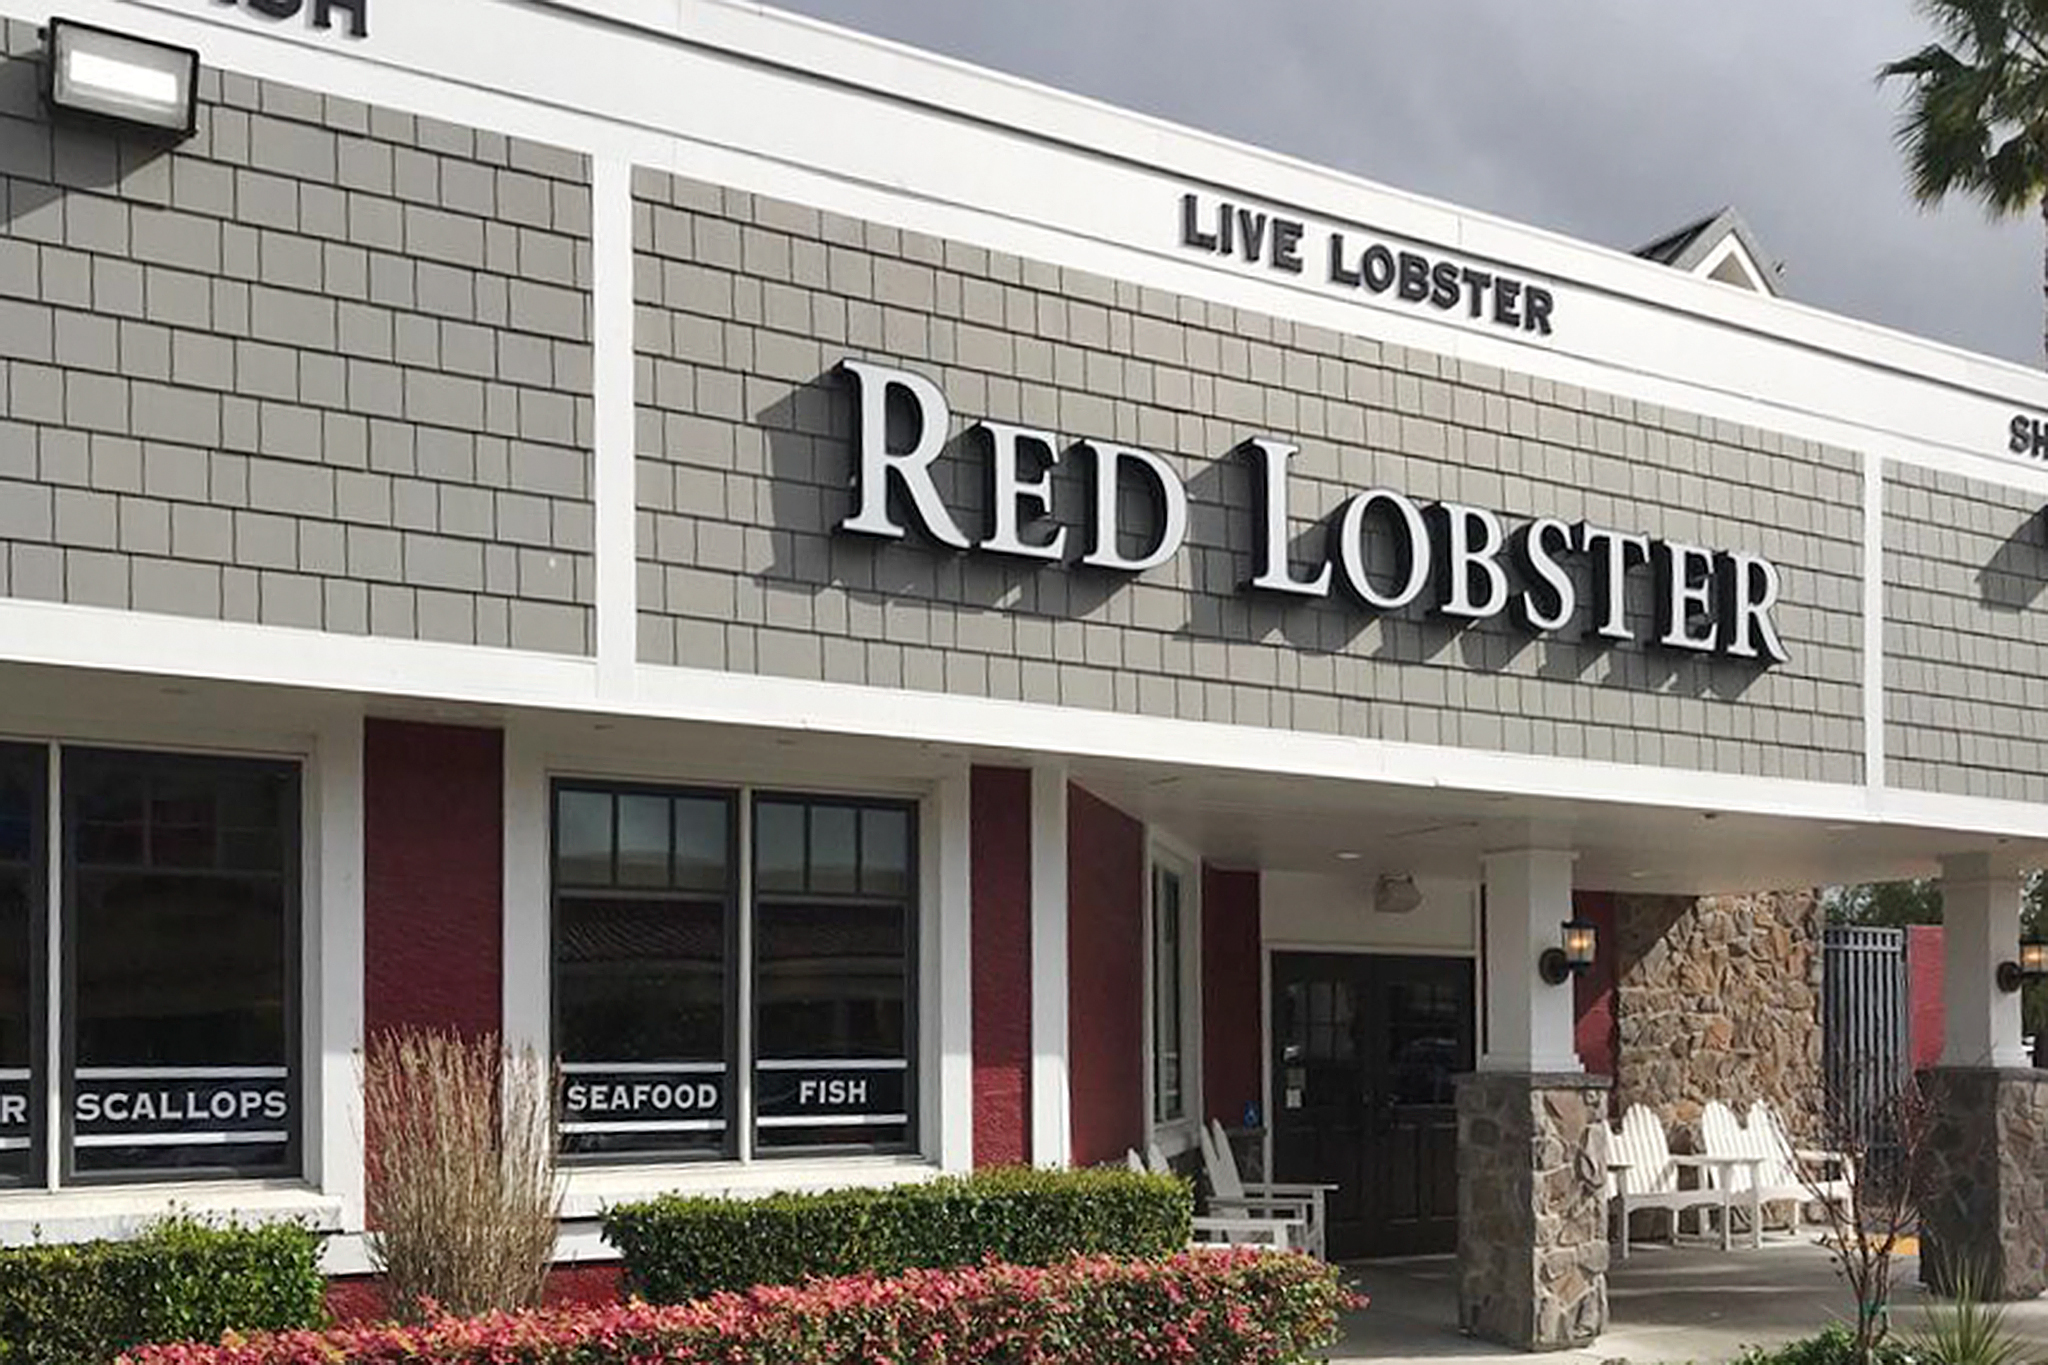 Jose Red Lobster location has closed 39 years